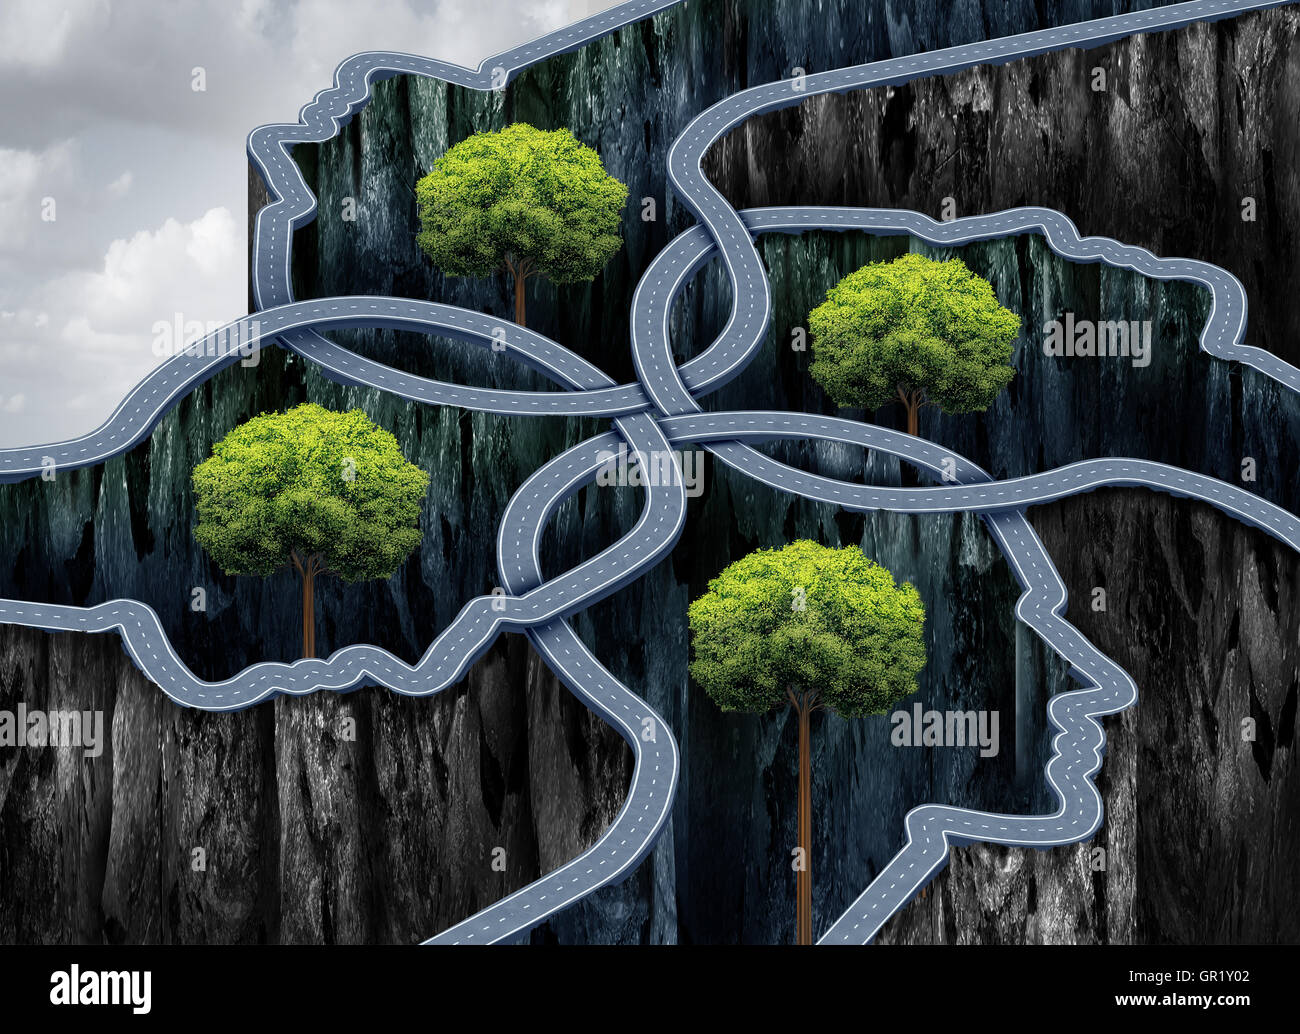 Connected business network success as roads shaped as a group of human heads as a networking concept with 3D illustration elements. Stock Photo